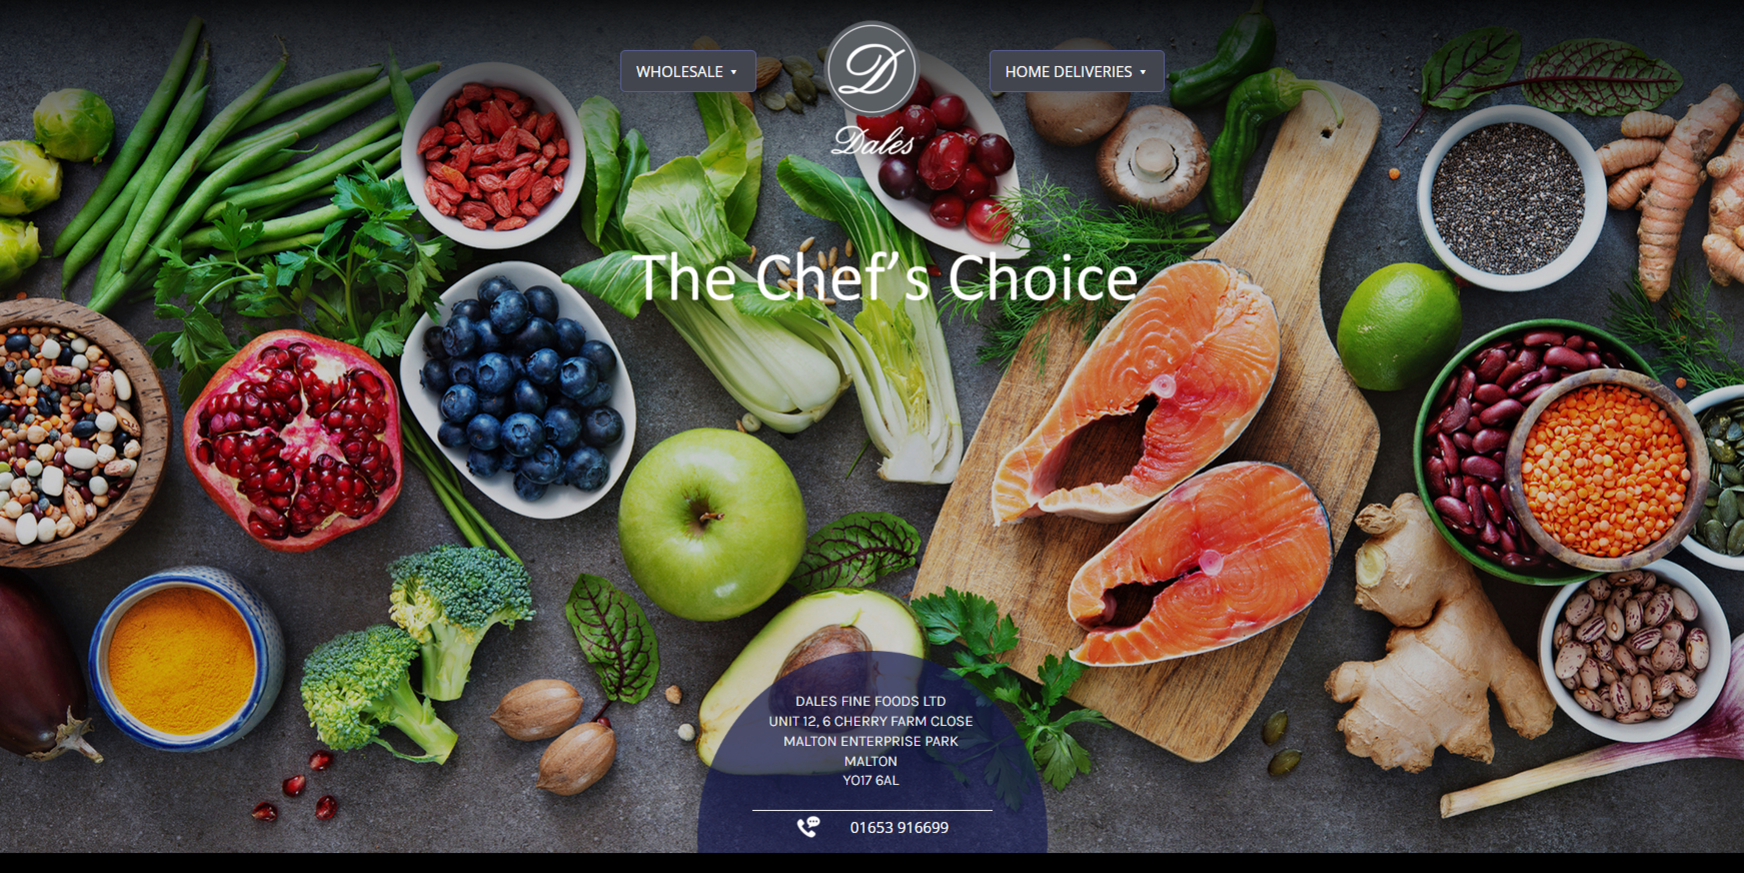 The new Chef's Choice website from it'seeze